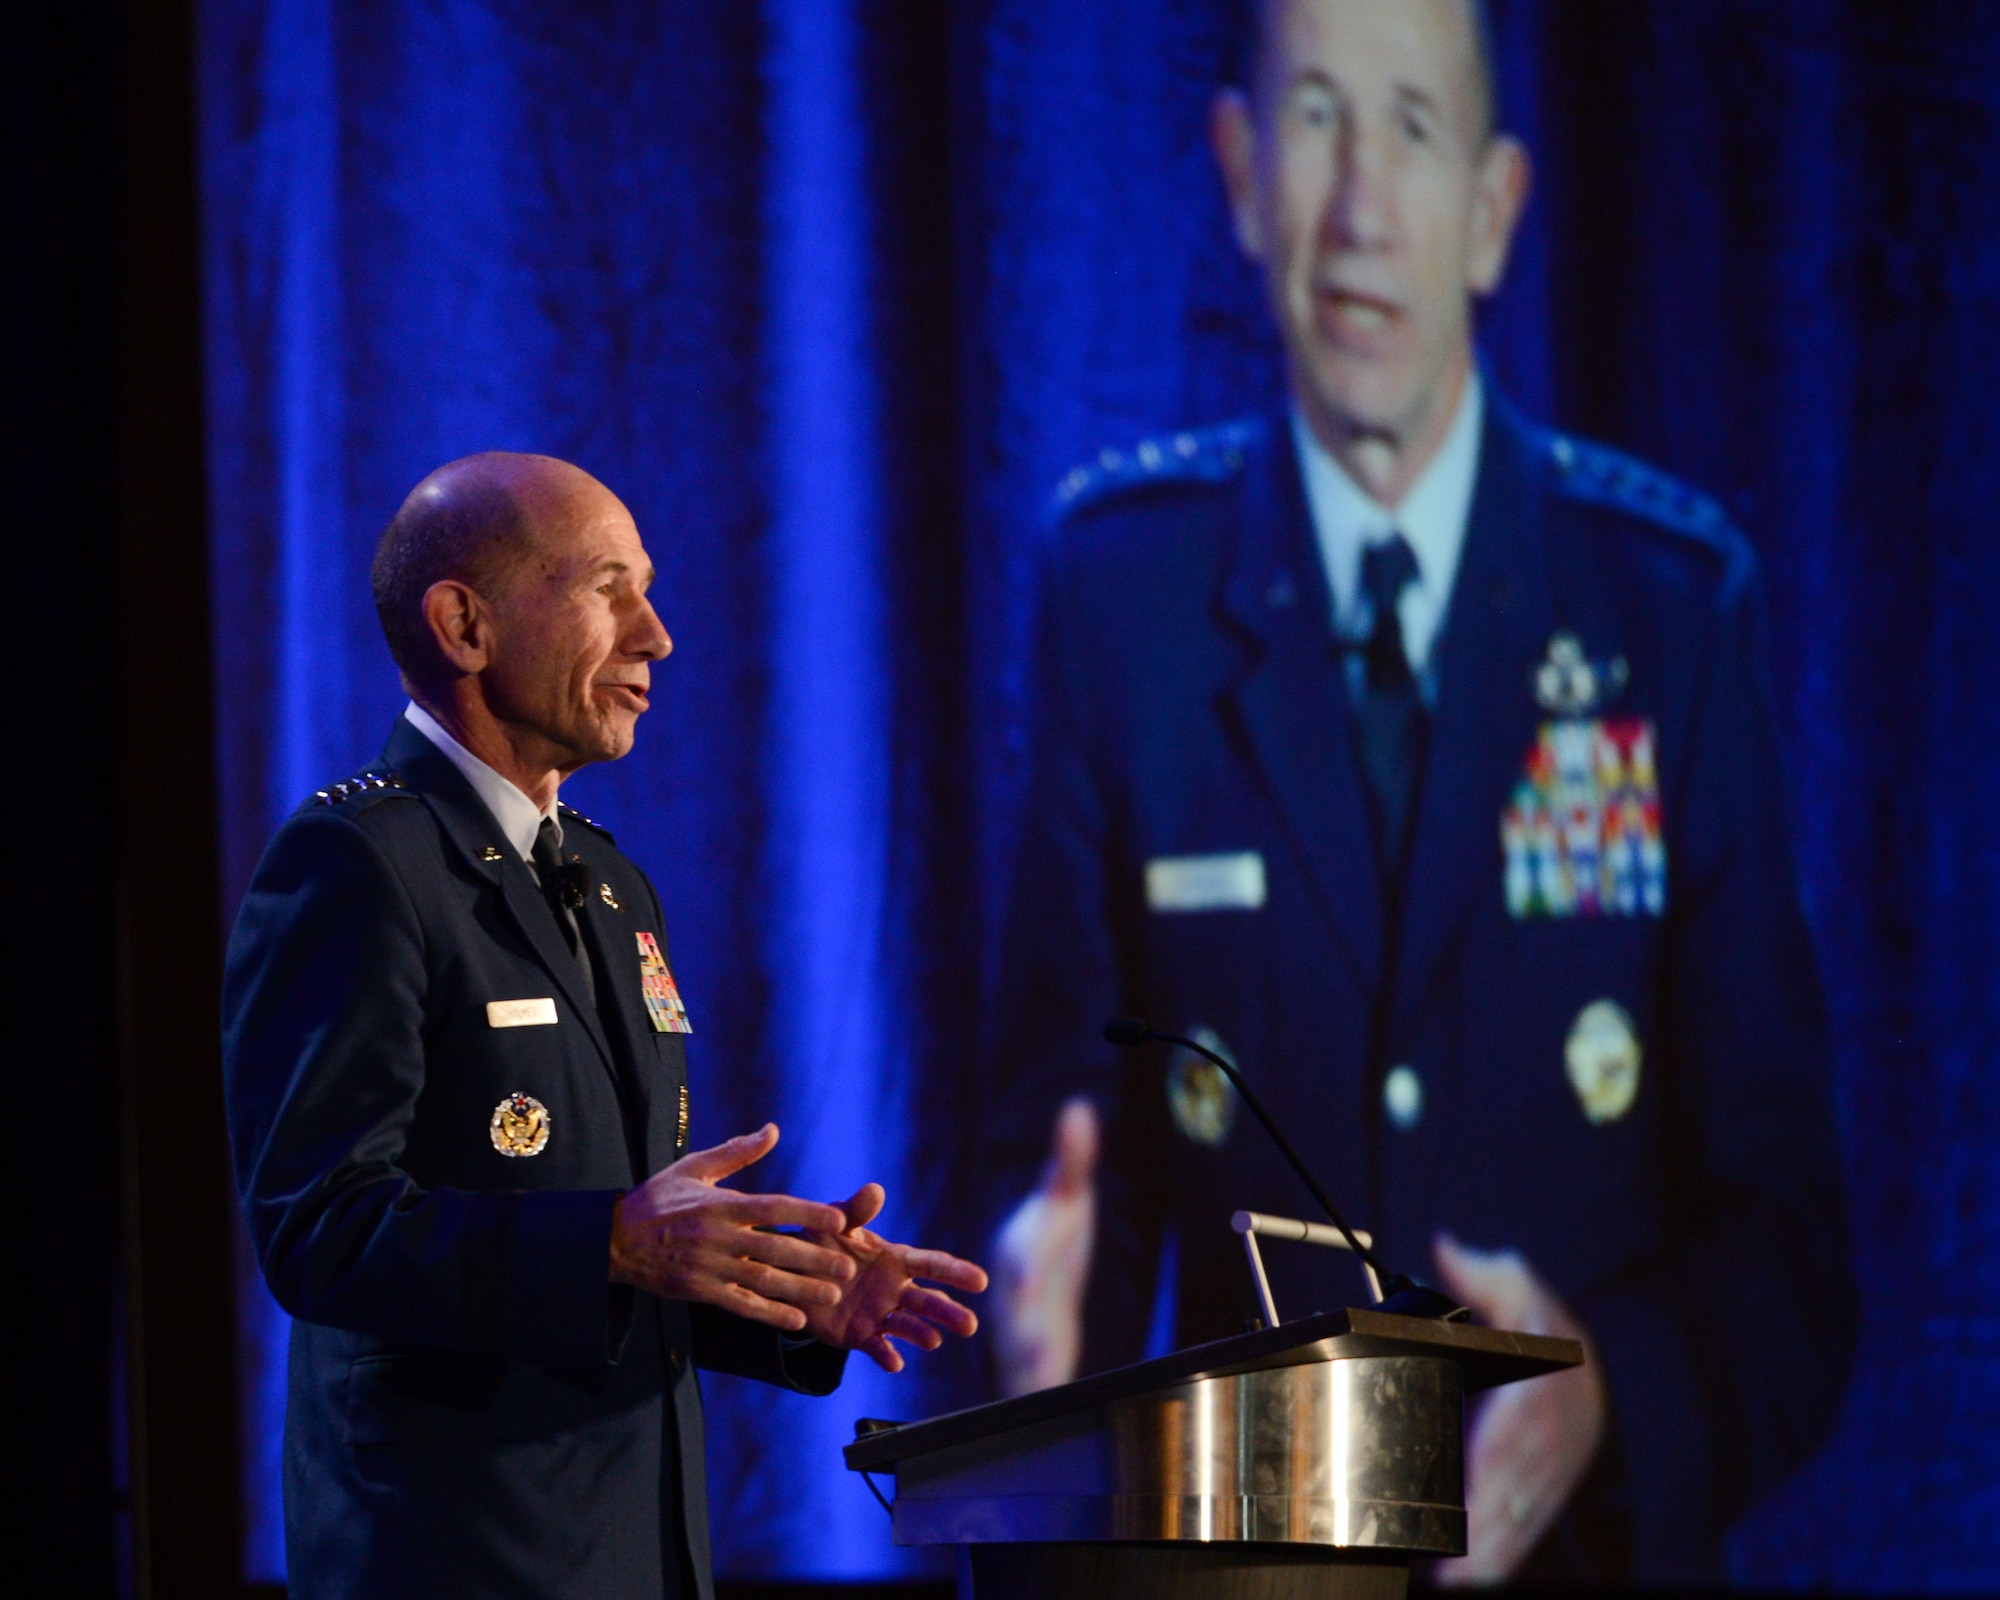 U.S. Air Force Gen. Mike Holmes, commander of Air Combat Command, speaks to Alamo Armed Forces Communication and Engineering Association Chapter Event attendees in San Antonio, Texas, Nov. 20, 2019. During the annual cyber- and technology-focused conference, Holmes discussed the importance of continuously evolving the U.S. military’s multi-domain warfighter to combat tomorrow’s threats. (U.S. Air Force photo by Sharon Singleton)